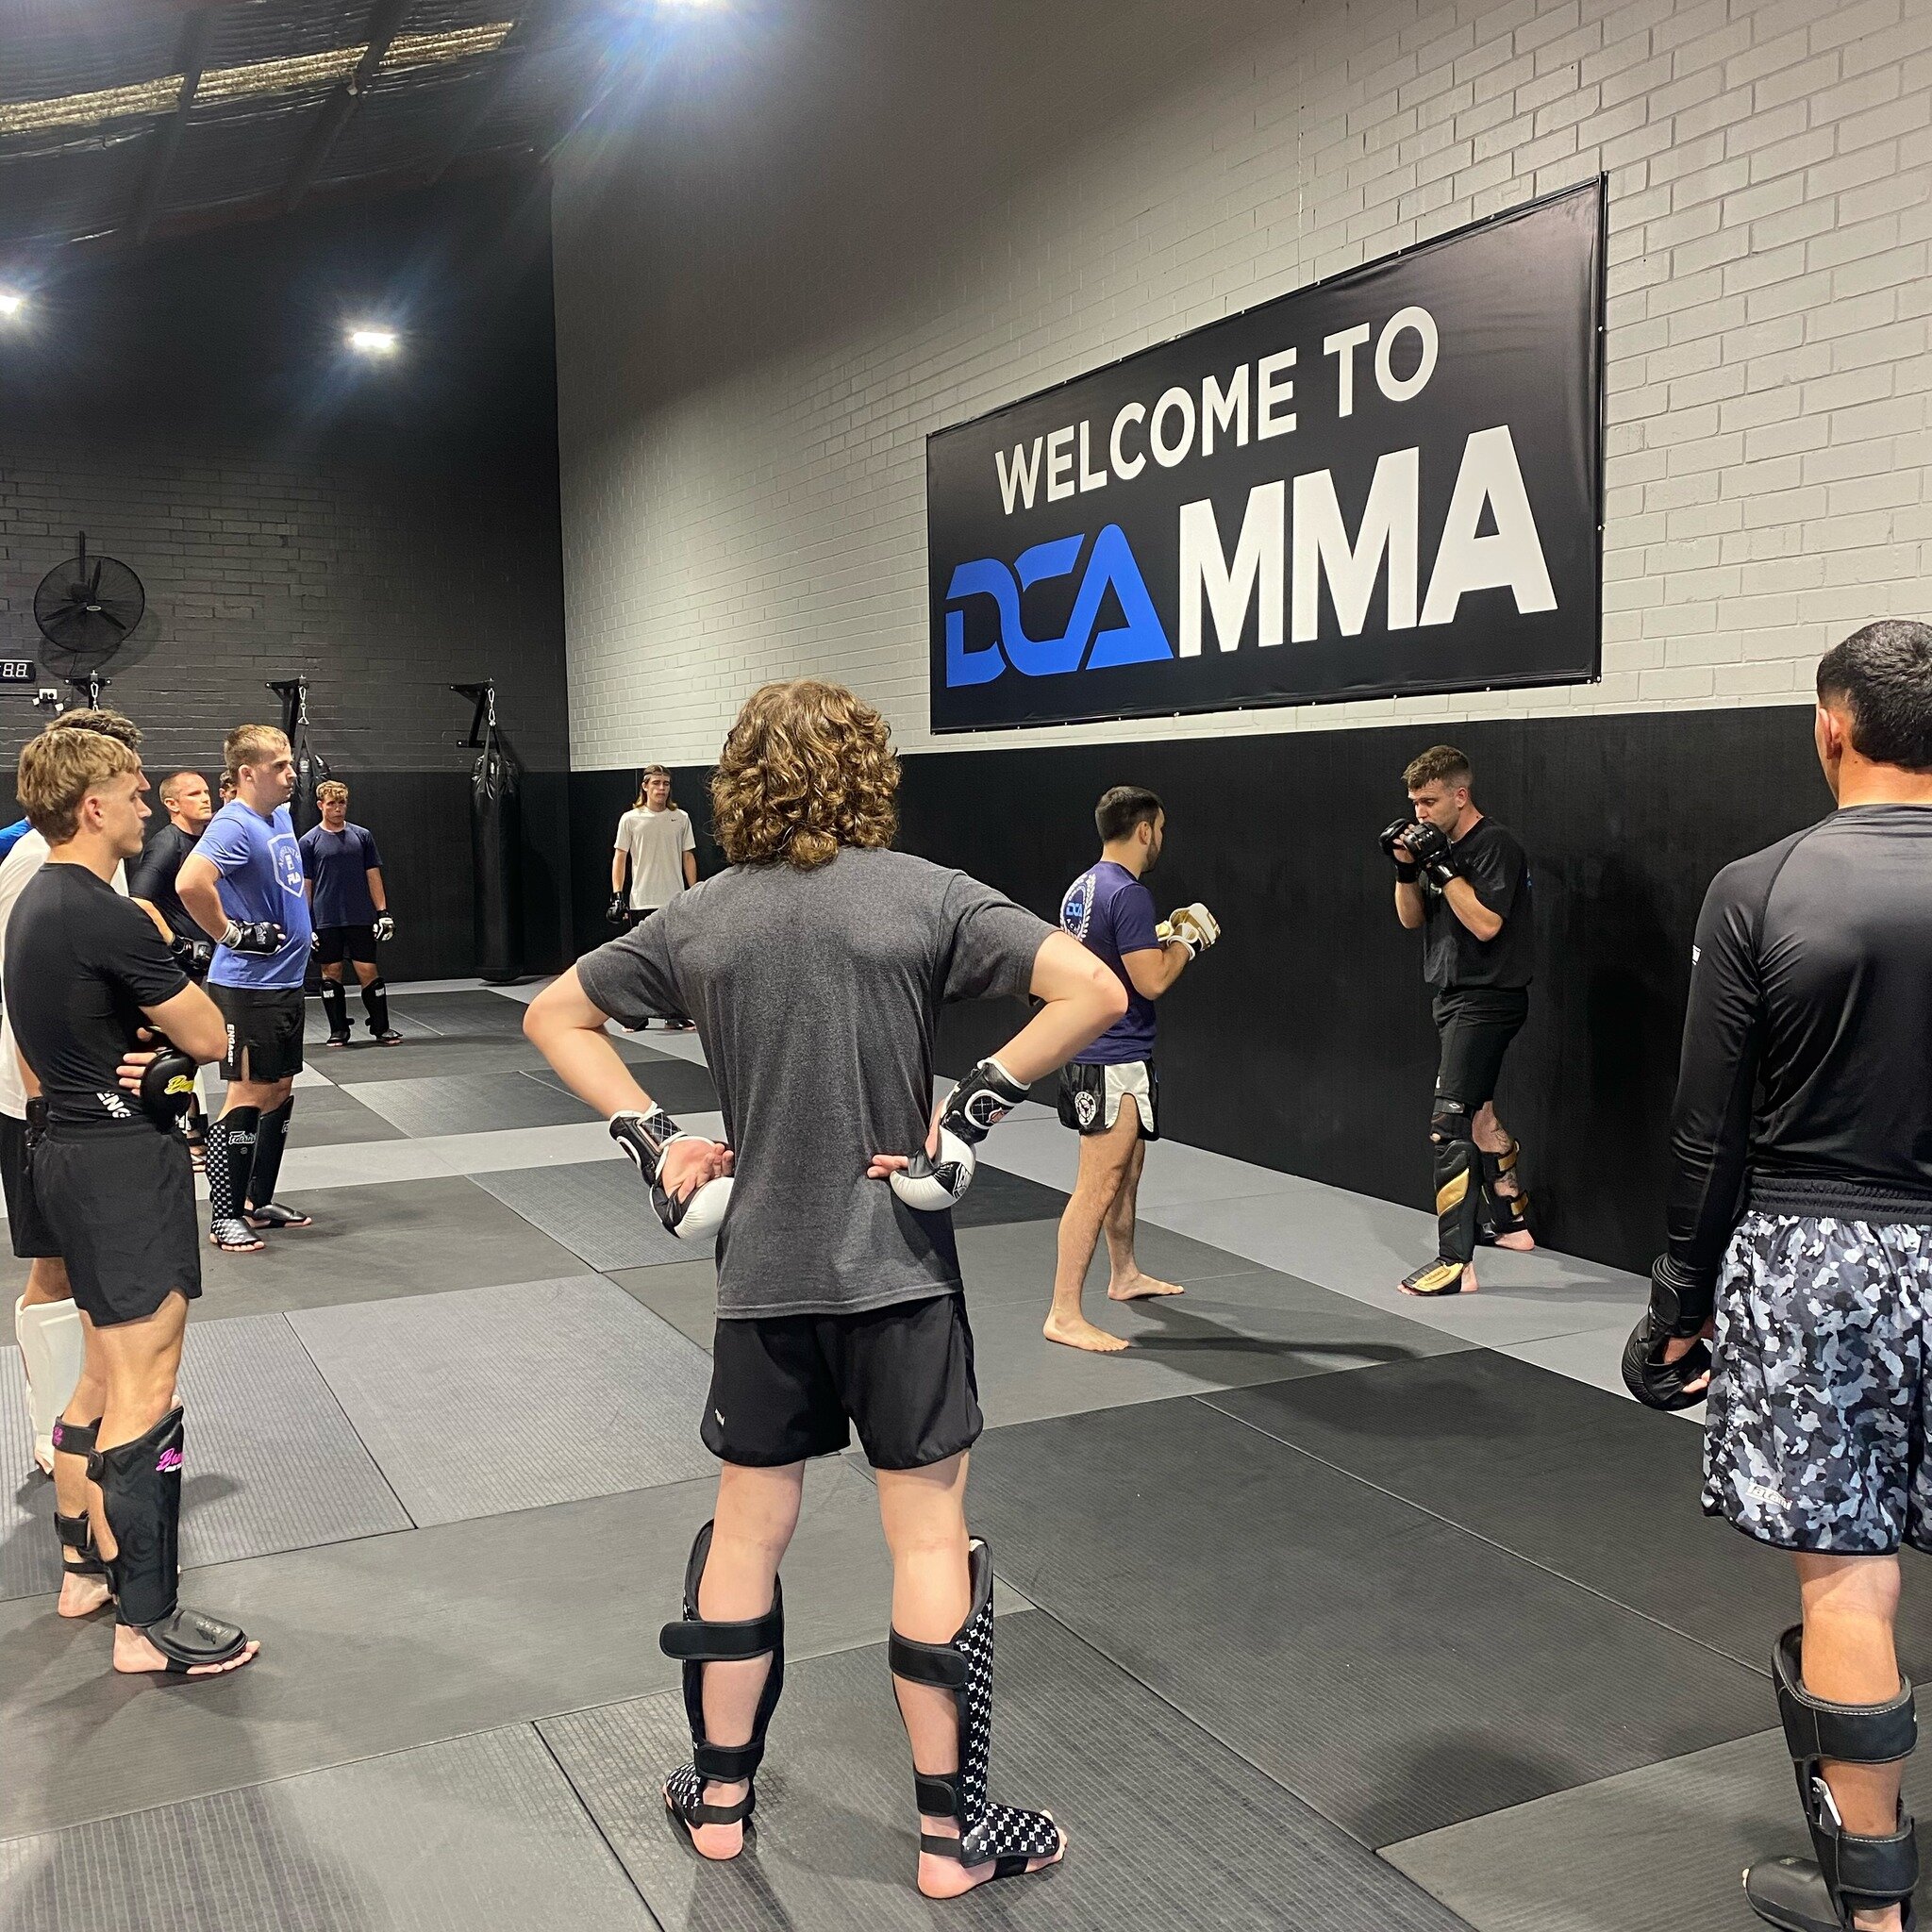 Monday Schedule 🫡🔥🥷☝️
Come in and burn those Easter eggs off! 

BJJ 9:30am 
Kids Juniors 4pm 
Kids 4:30pm 
BJJ 5:30pm 
Striking for MMA 6:30pm